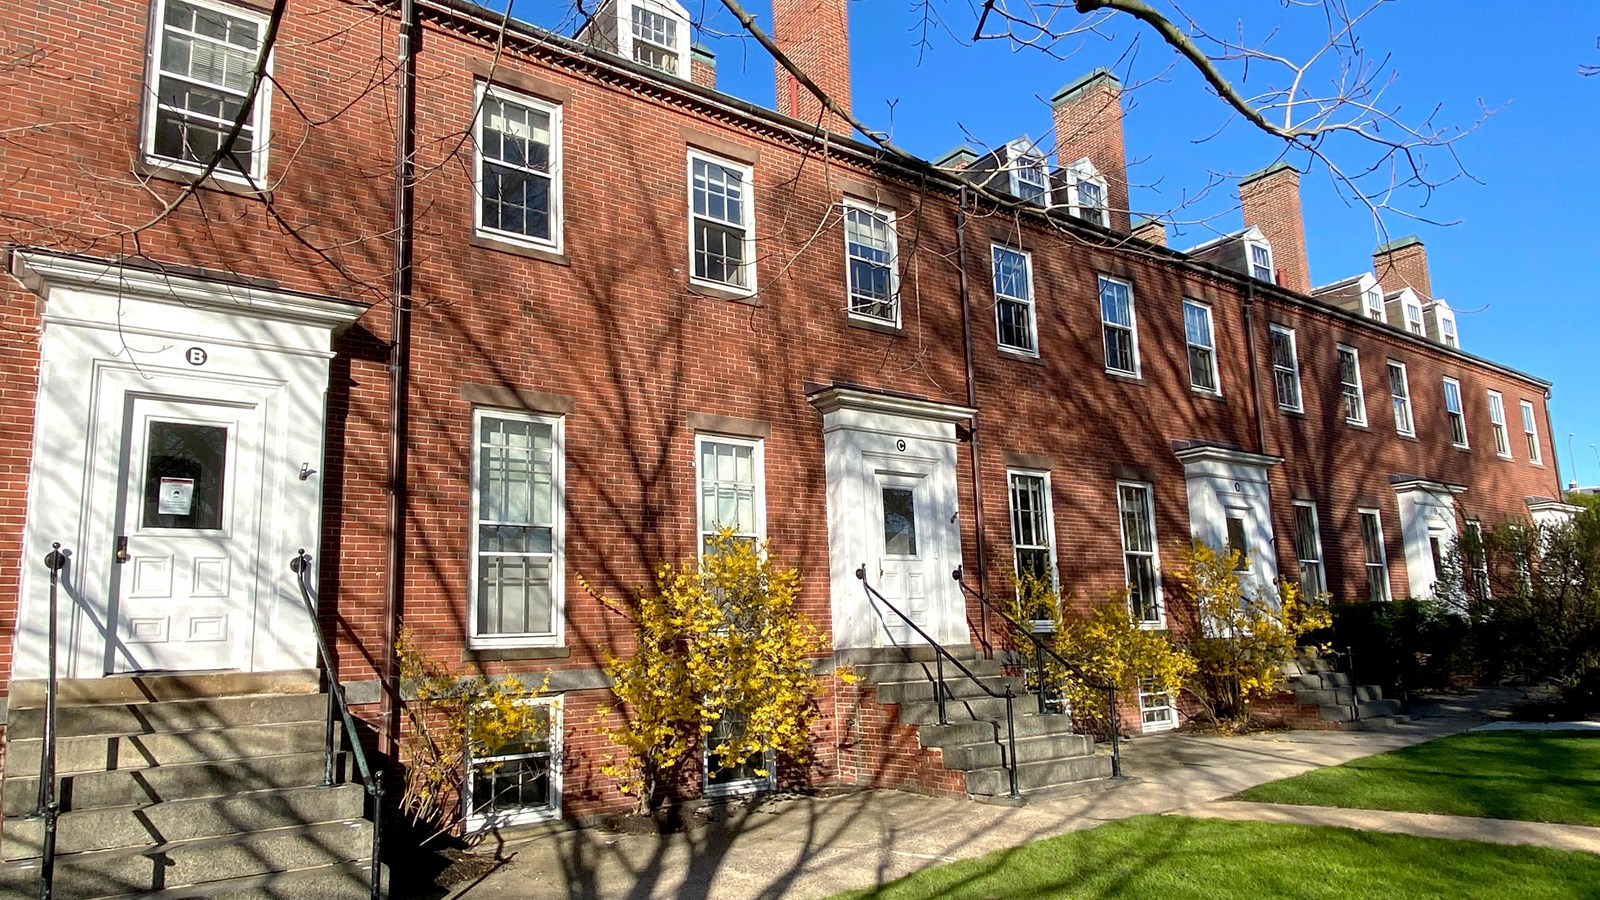 5 Federalist style brick townhouses with staircases leading up to each unit\'s white door.